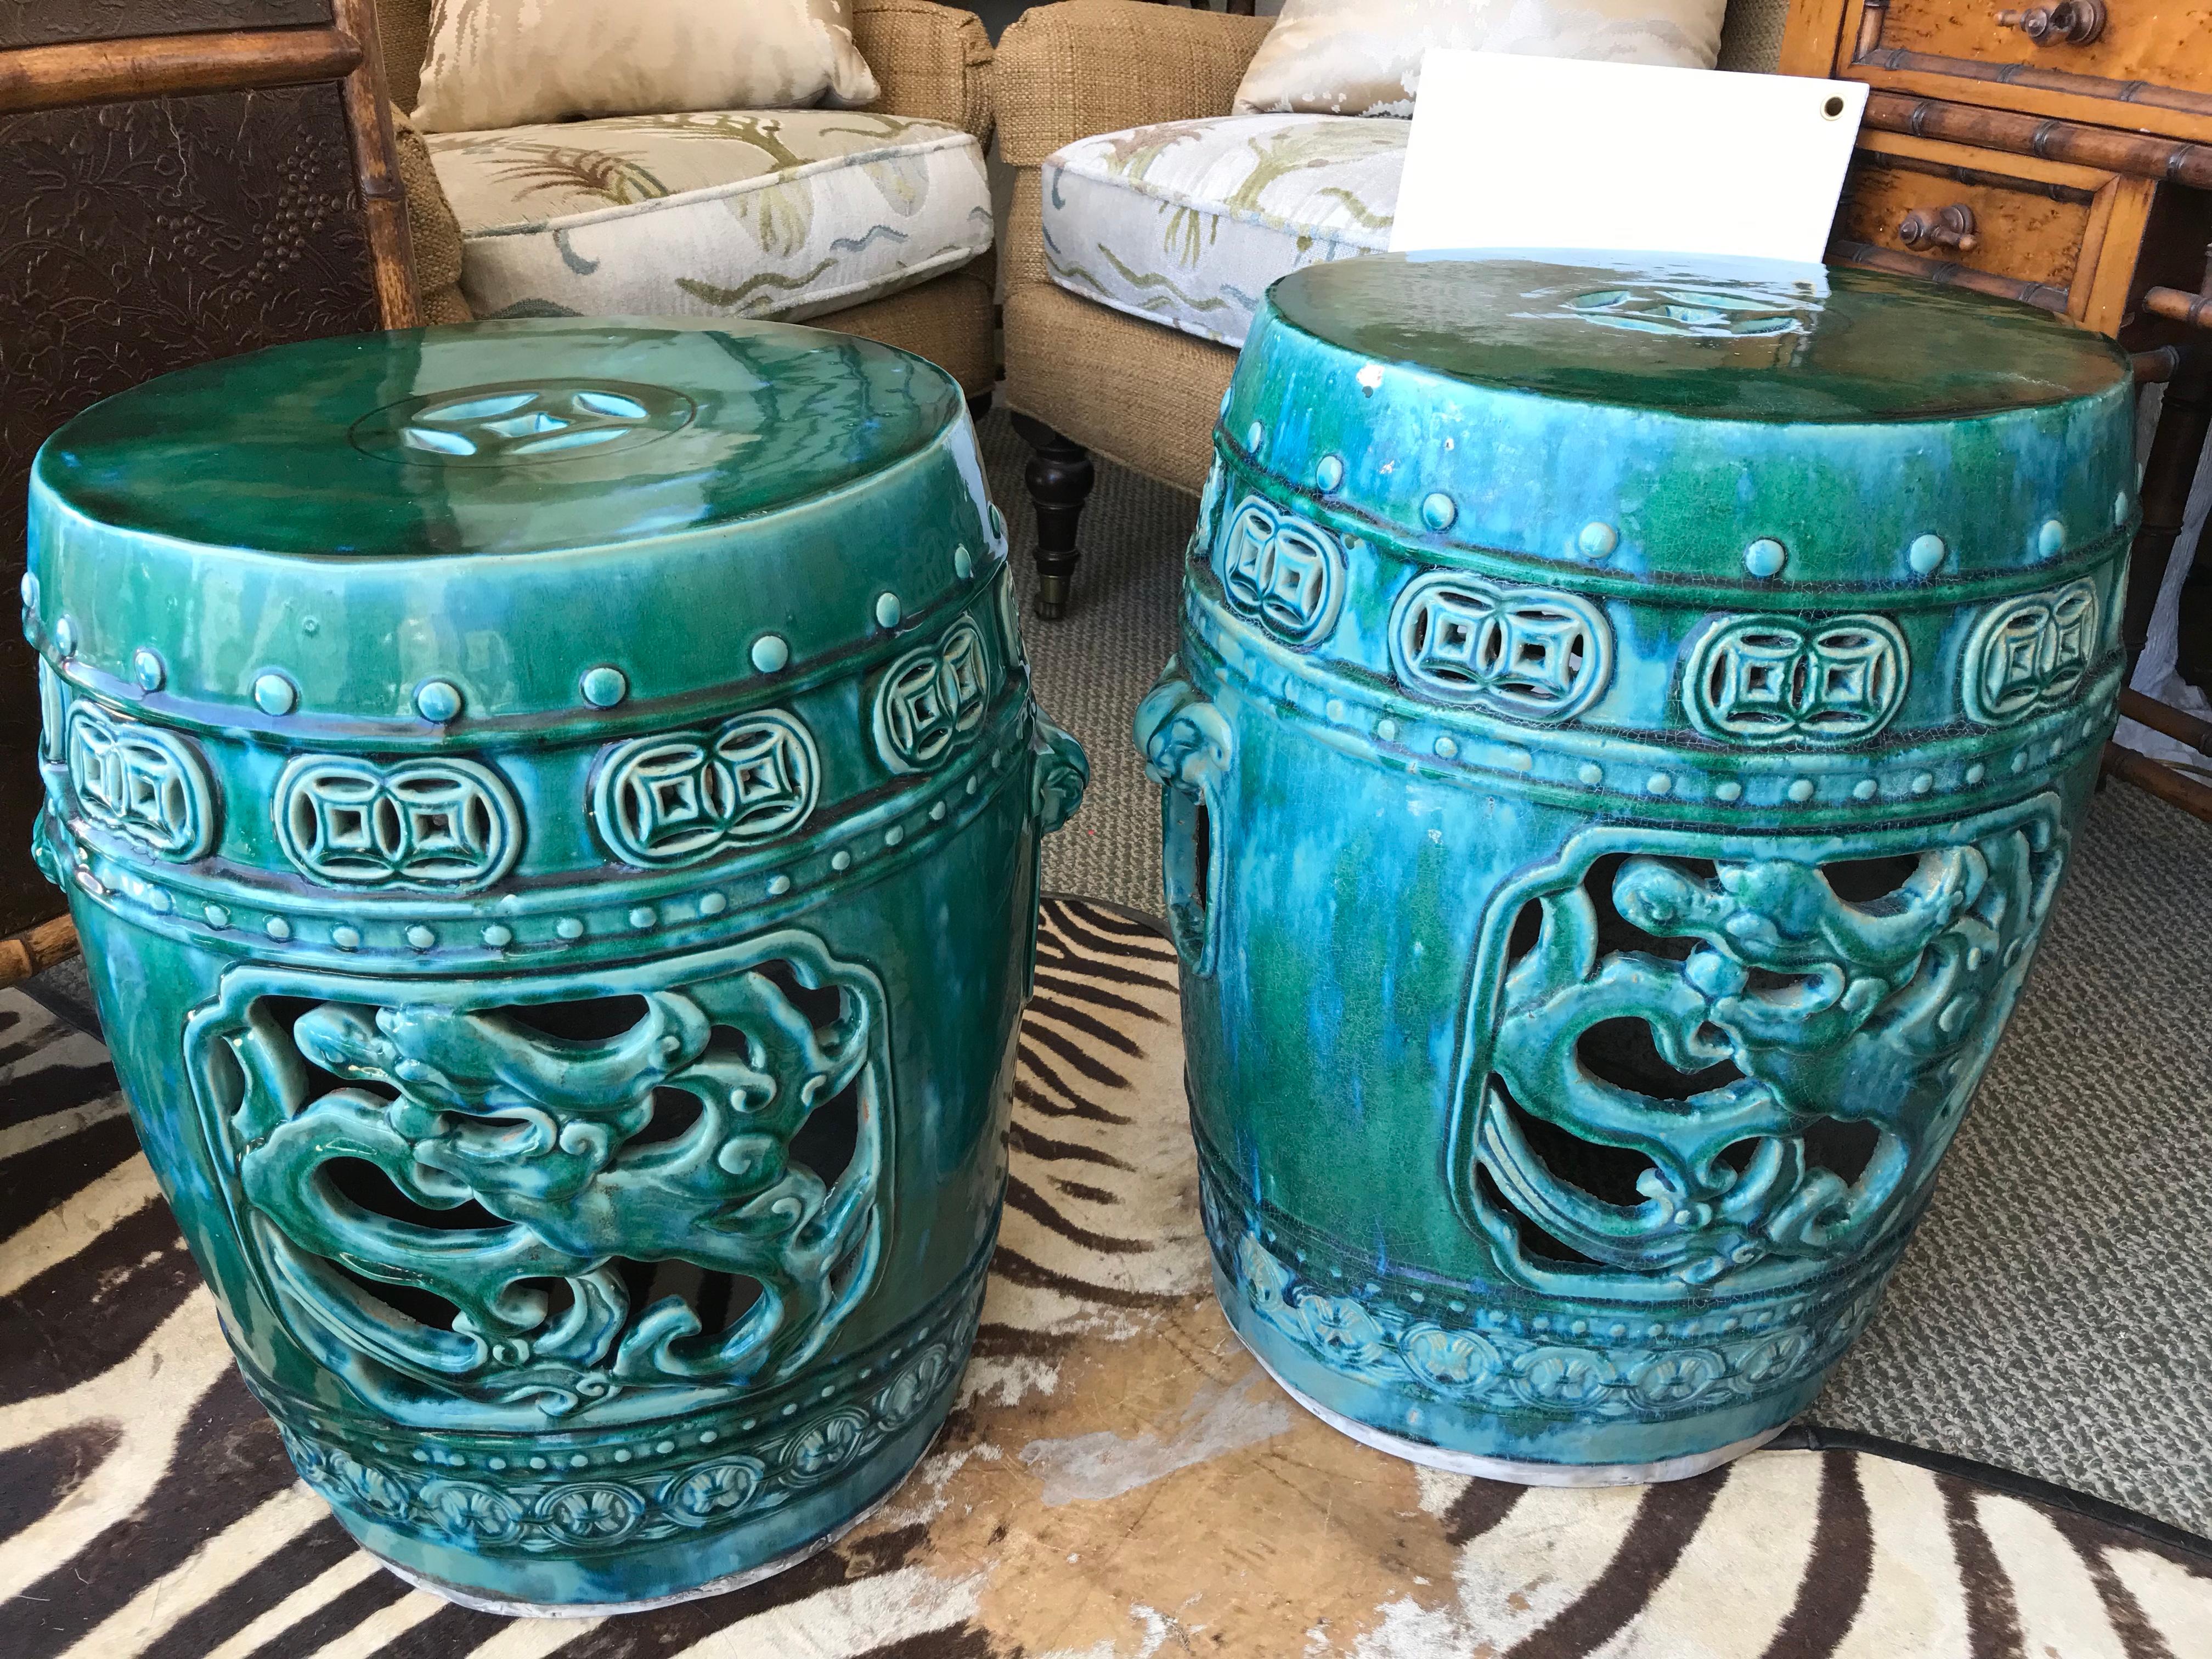 Stunning color and design. The garden seats are heavy glazed terra-cotta - generously scaled
and feature pierced open sides with dragons and foo dogs handles.